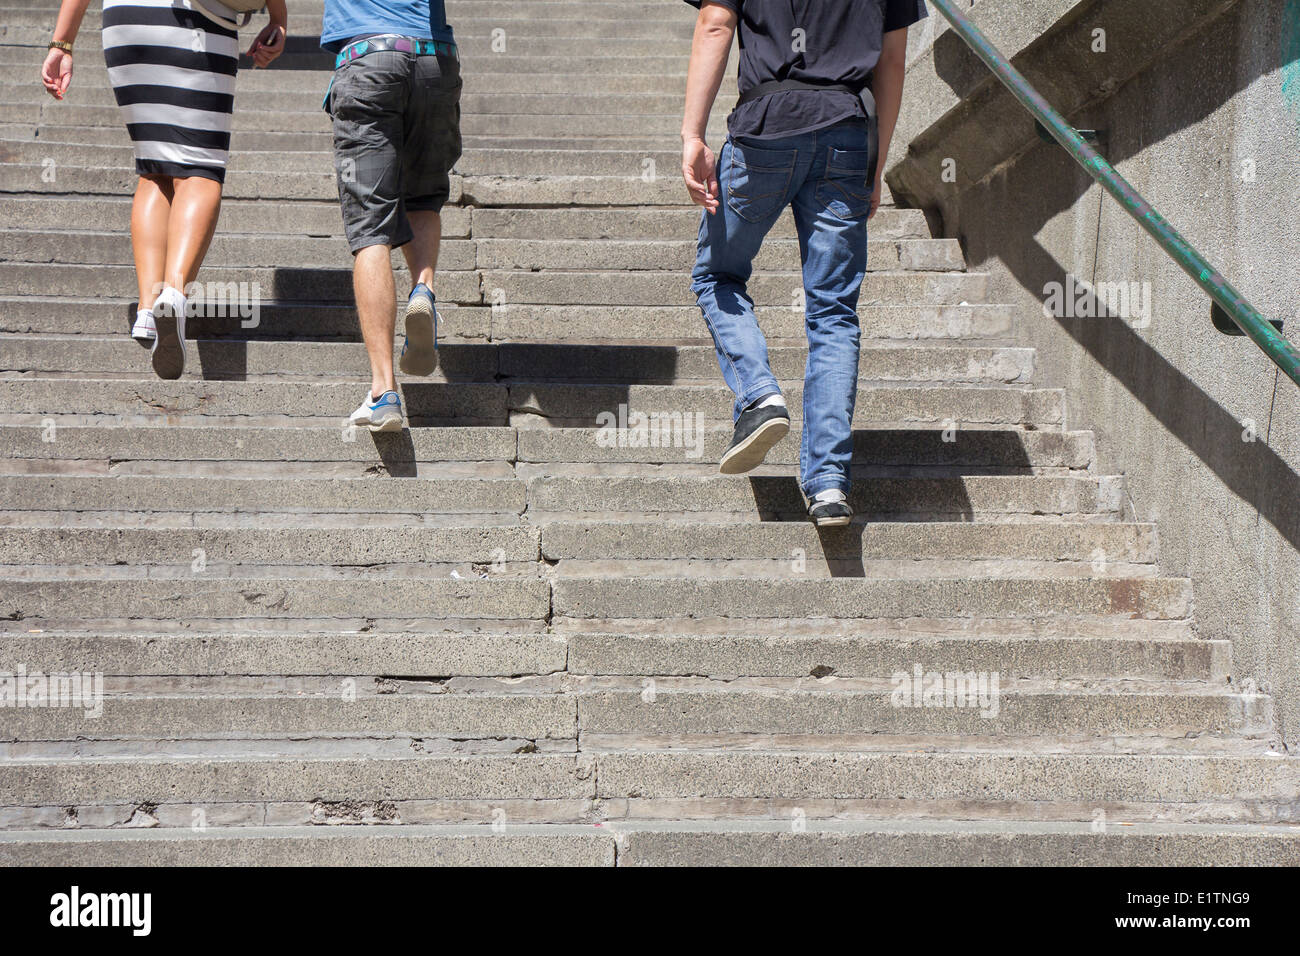 A woman and two man climbing on concrete stairs Stock Photo